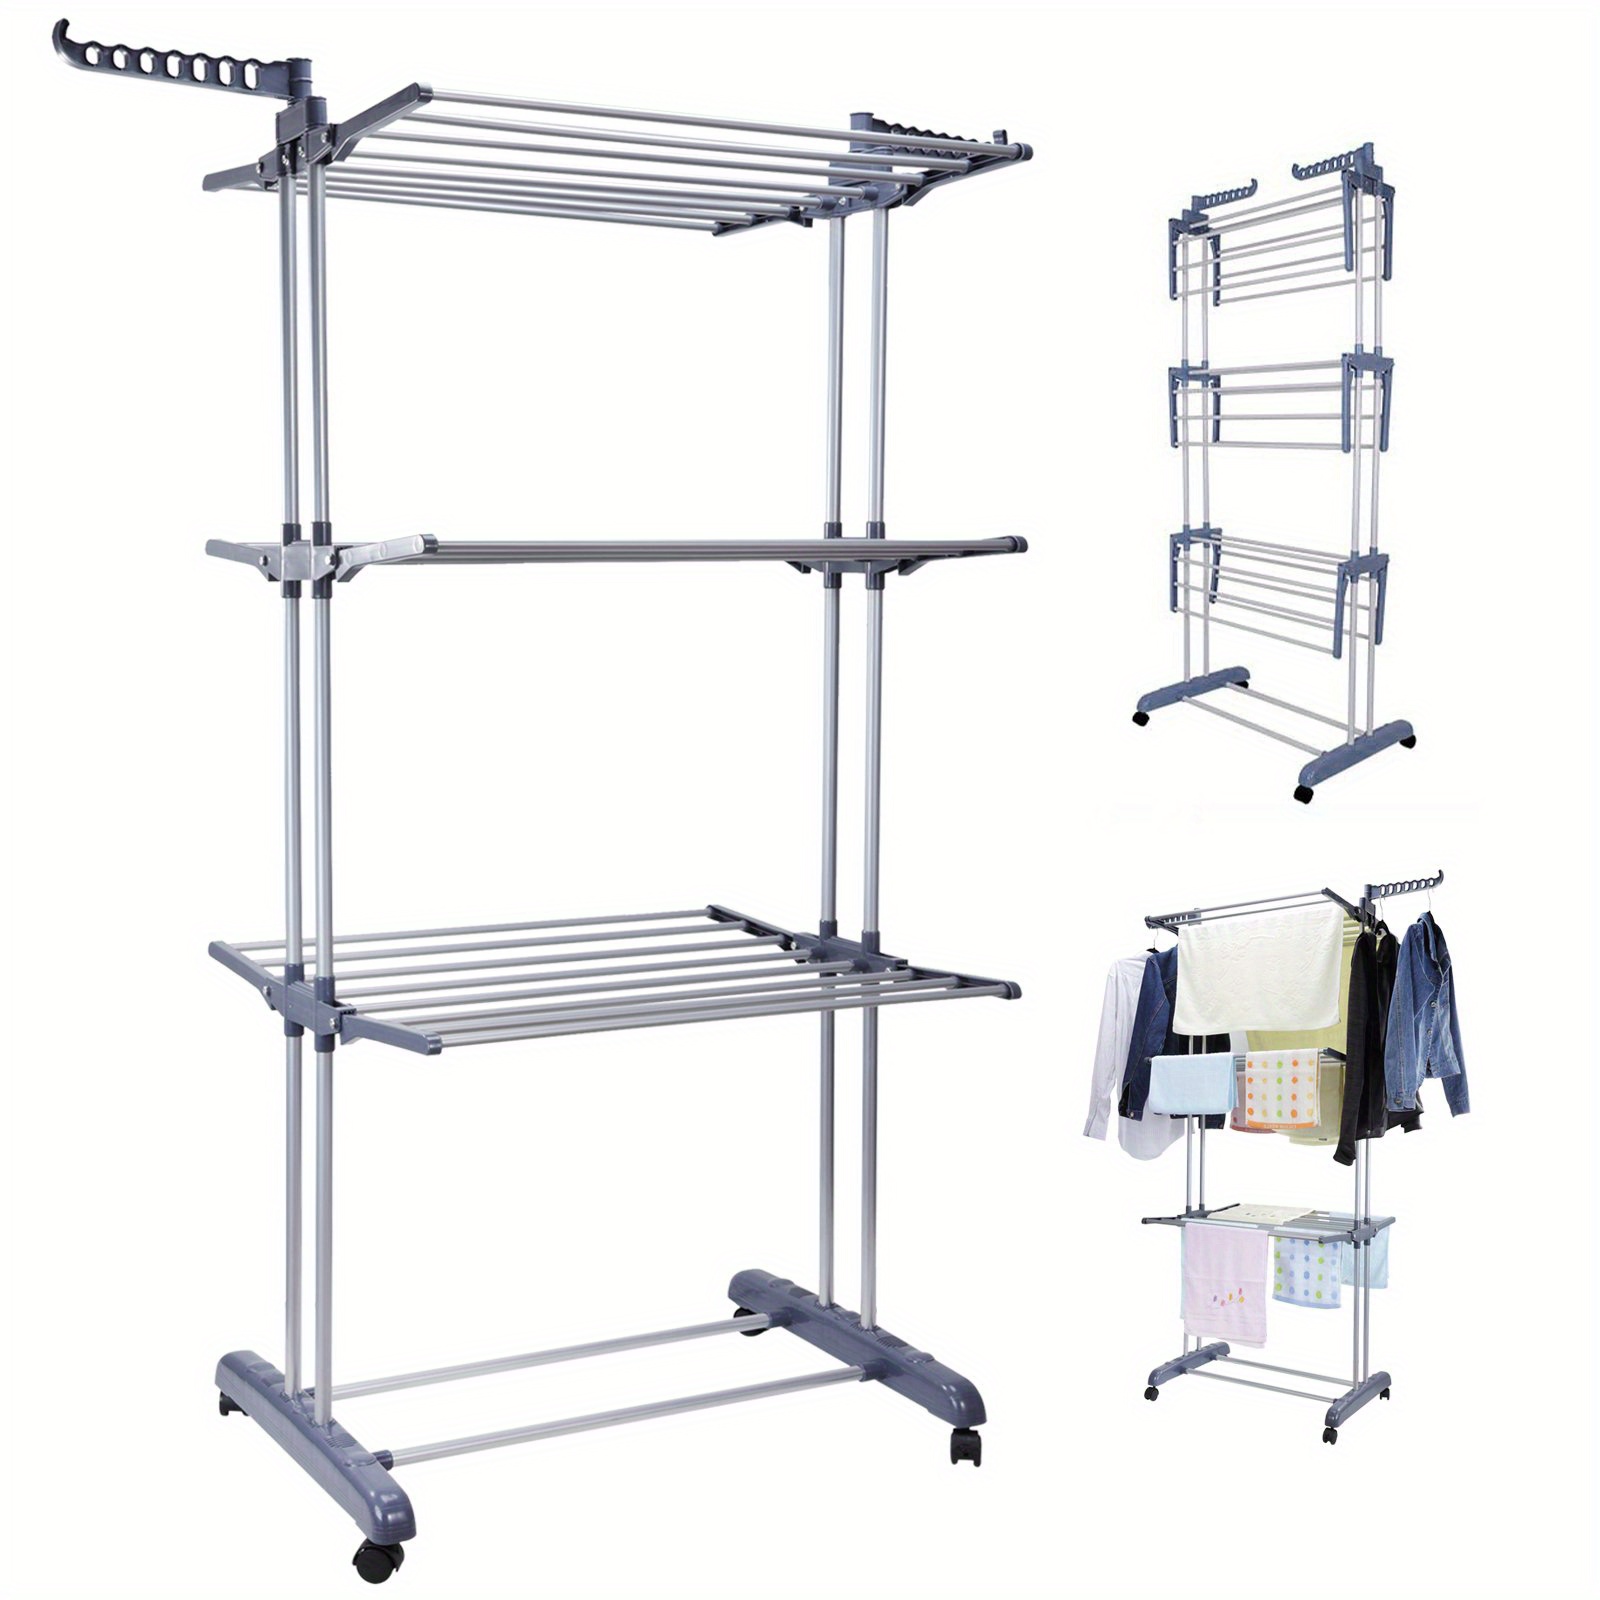 

Clothes Drying Rack, 4-tier Collapsible Rolling Dryer Clothes Hanger Adjustable Large Garment Laundry Racks With Foldable Wings Indoor Outdoor, Gray